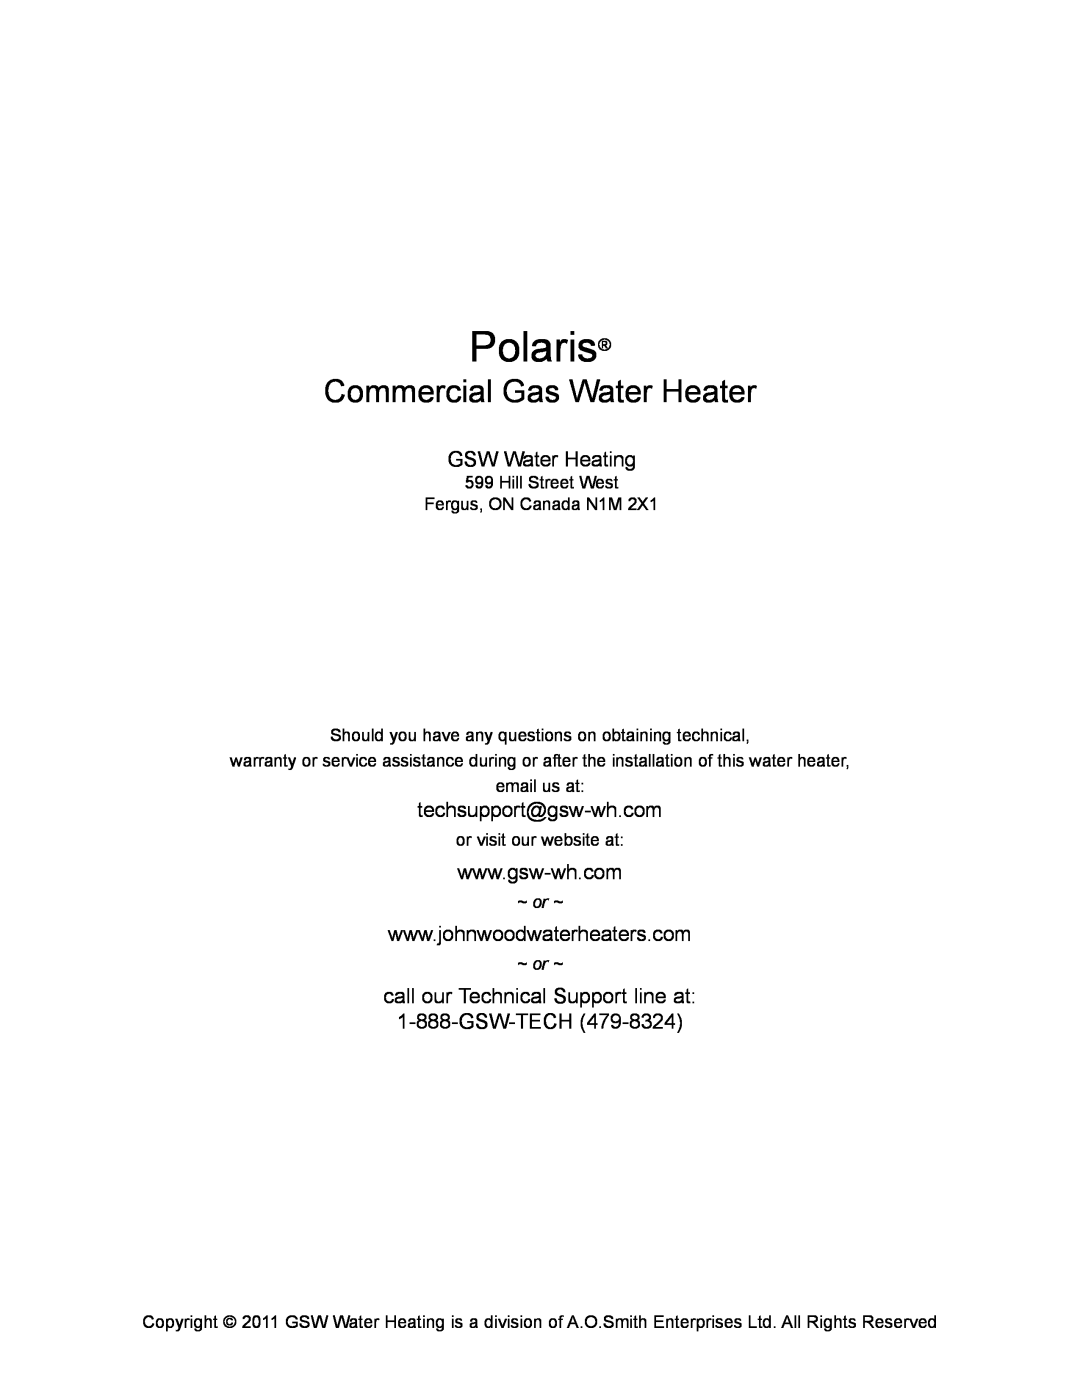 Polaris PC 100-34 2NV Polaris, Commercial Gas Water Heater, GSW Water Heating, techsupport@gsw-wh.com, ~ or ~ 